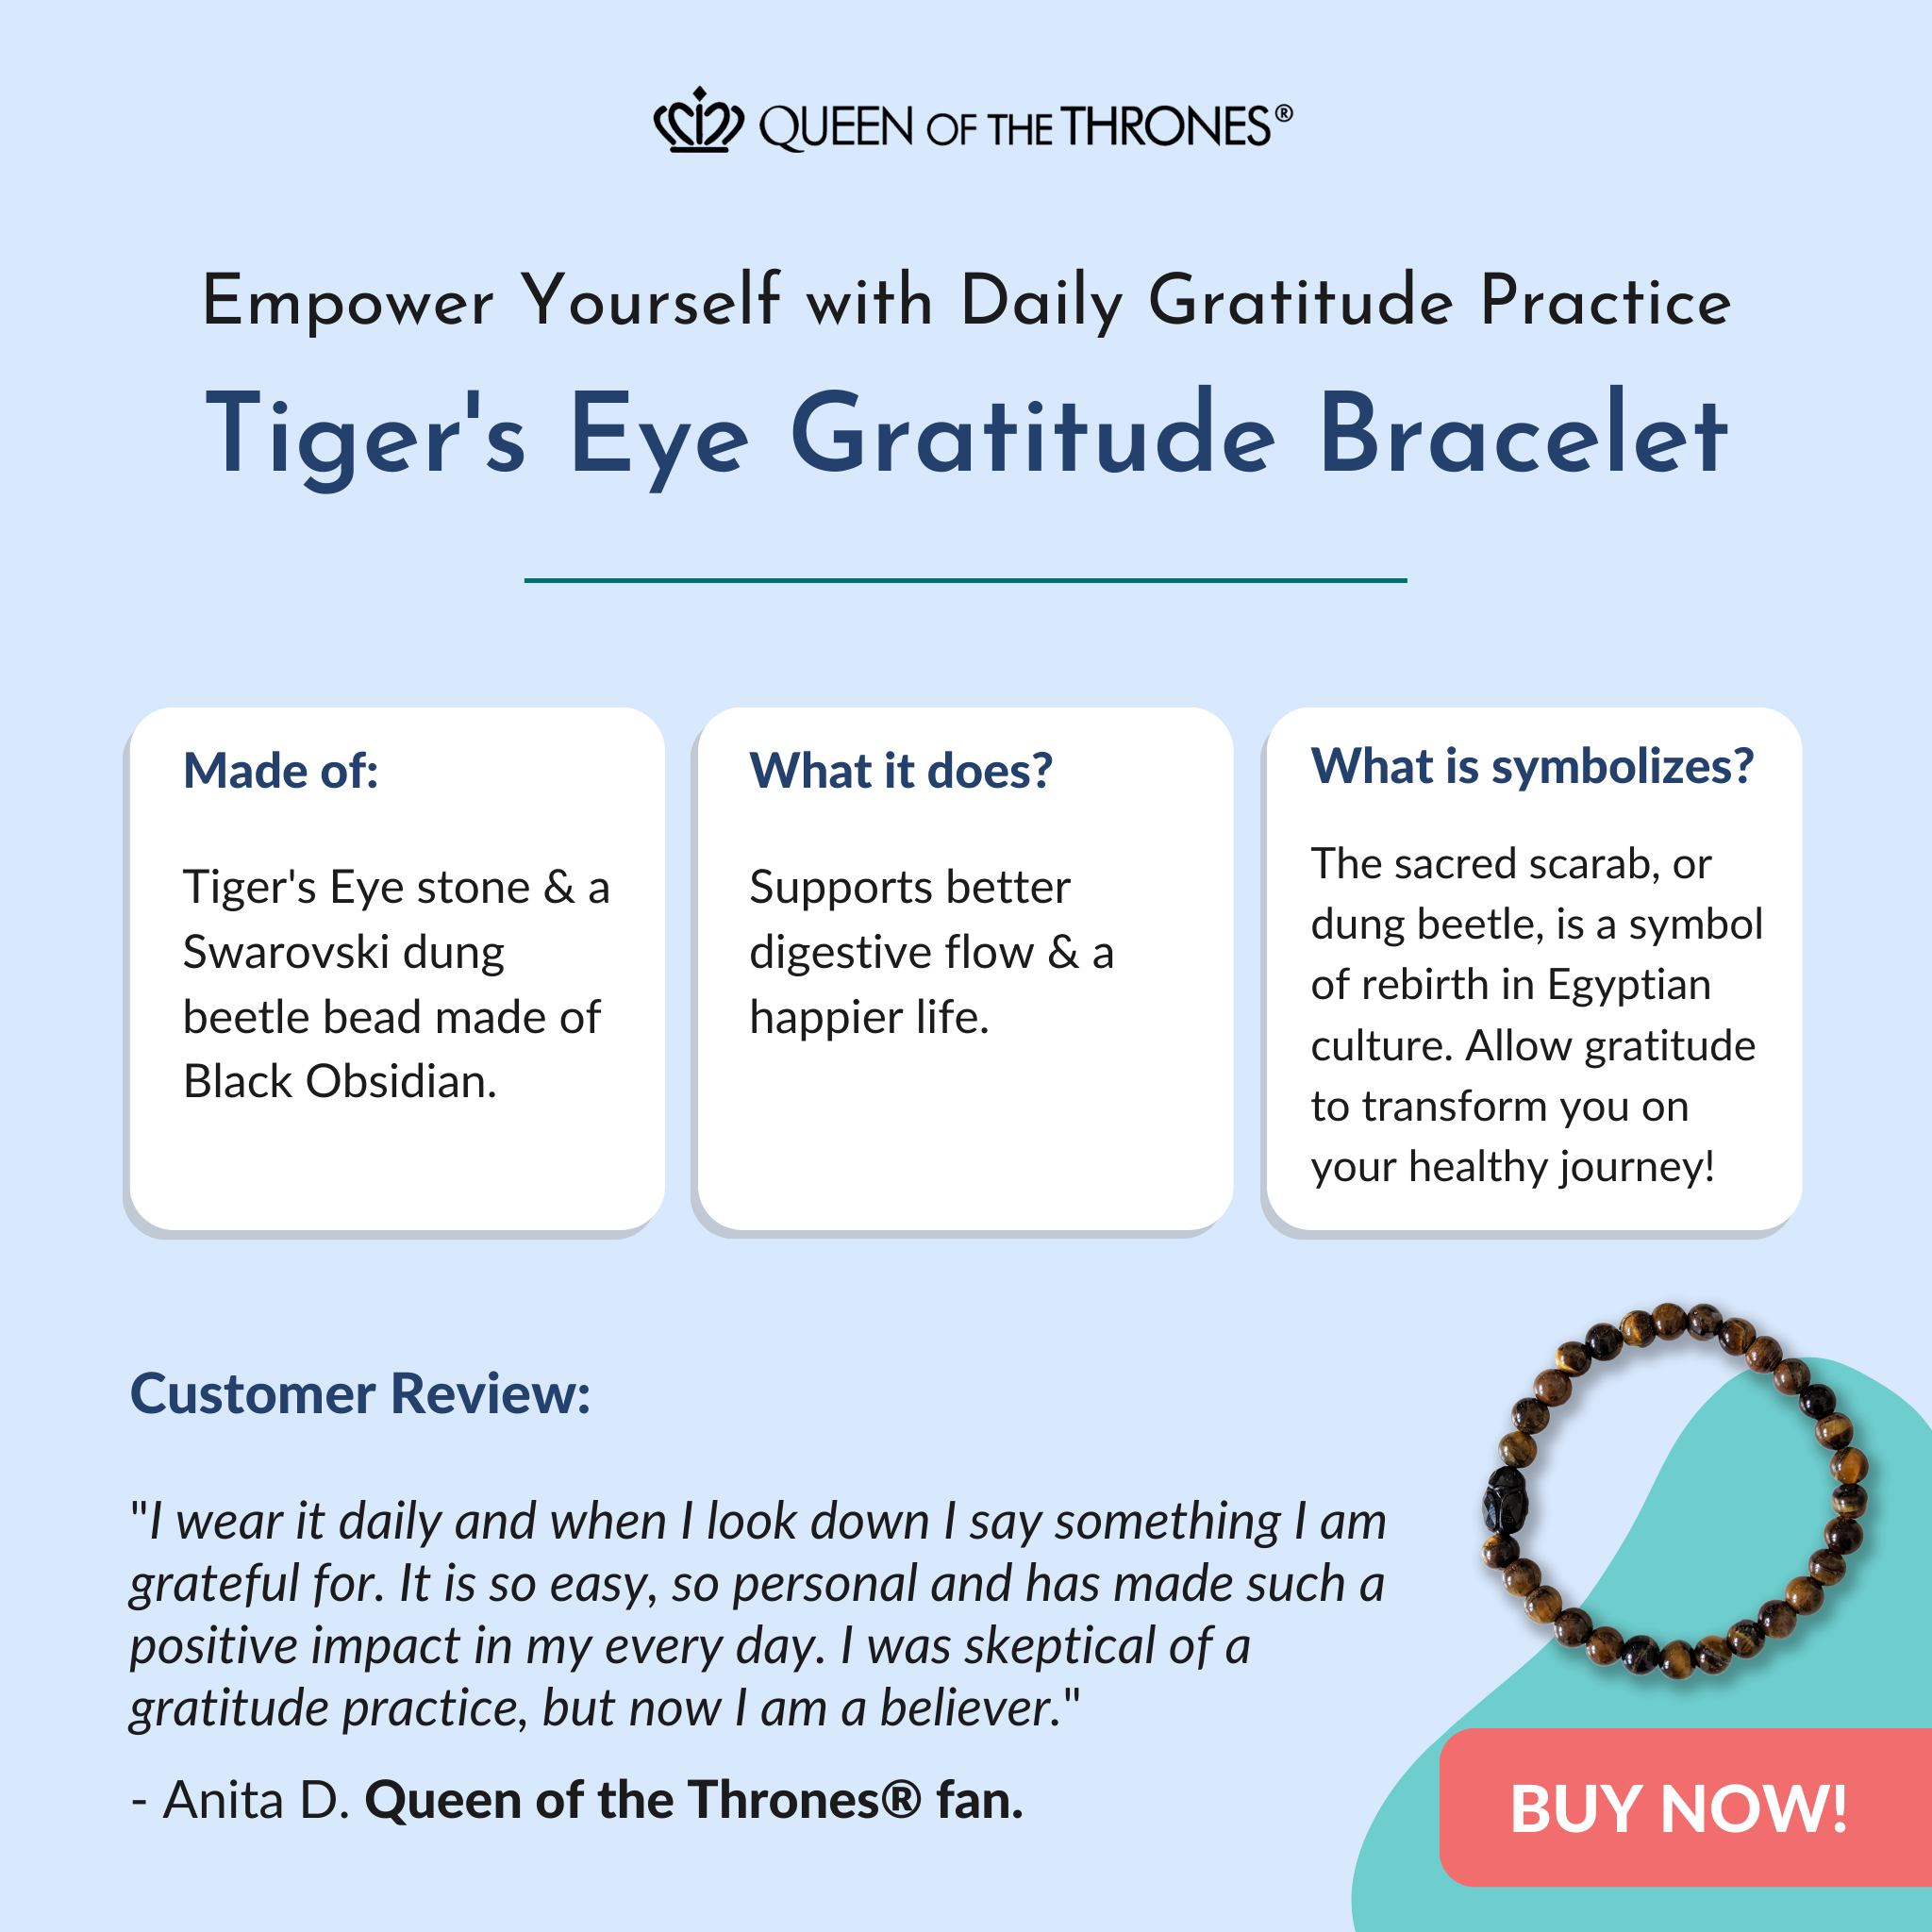 Empower yourself with Queen of the Thornes Gratitude bracelet